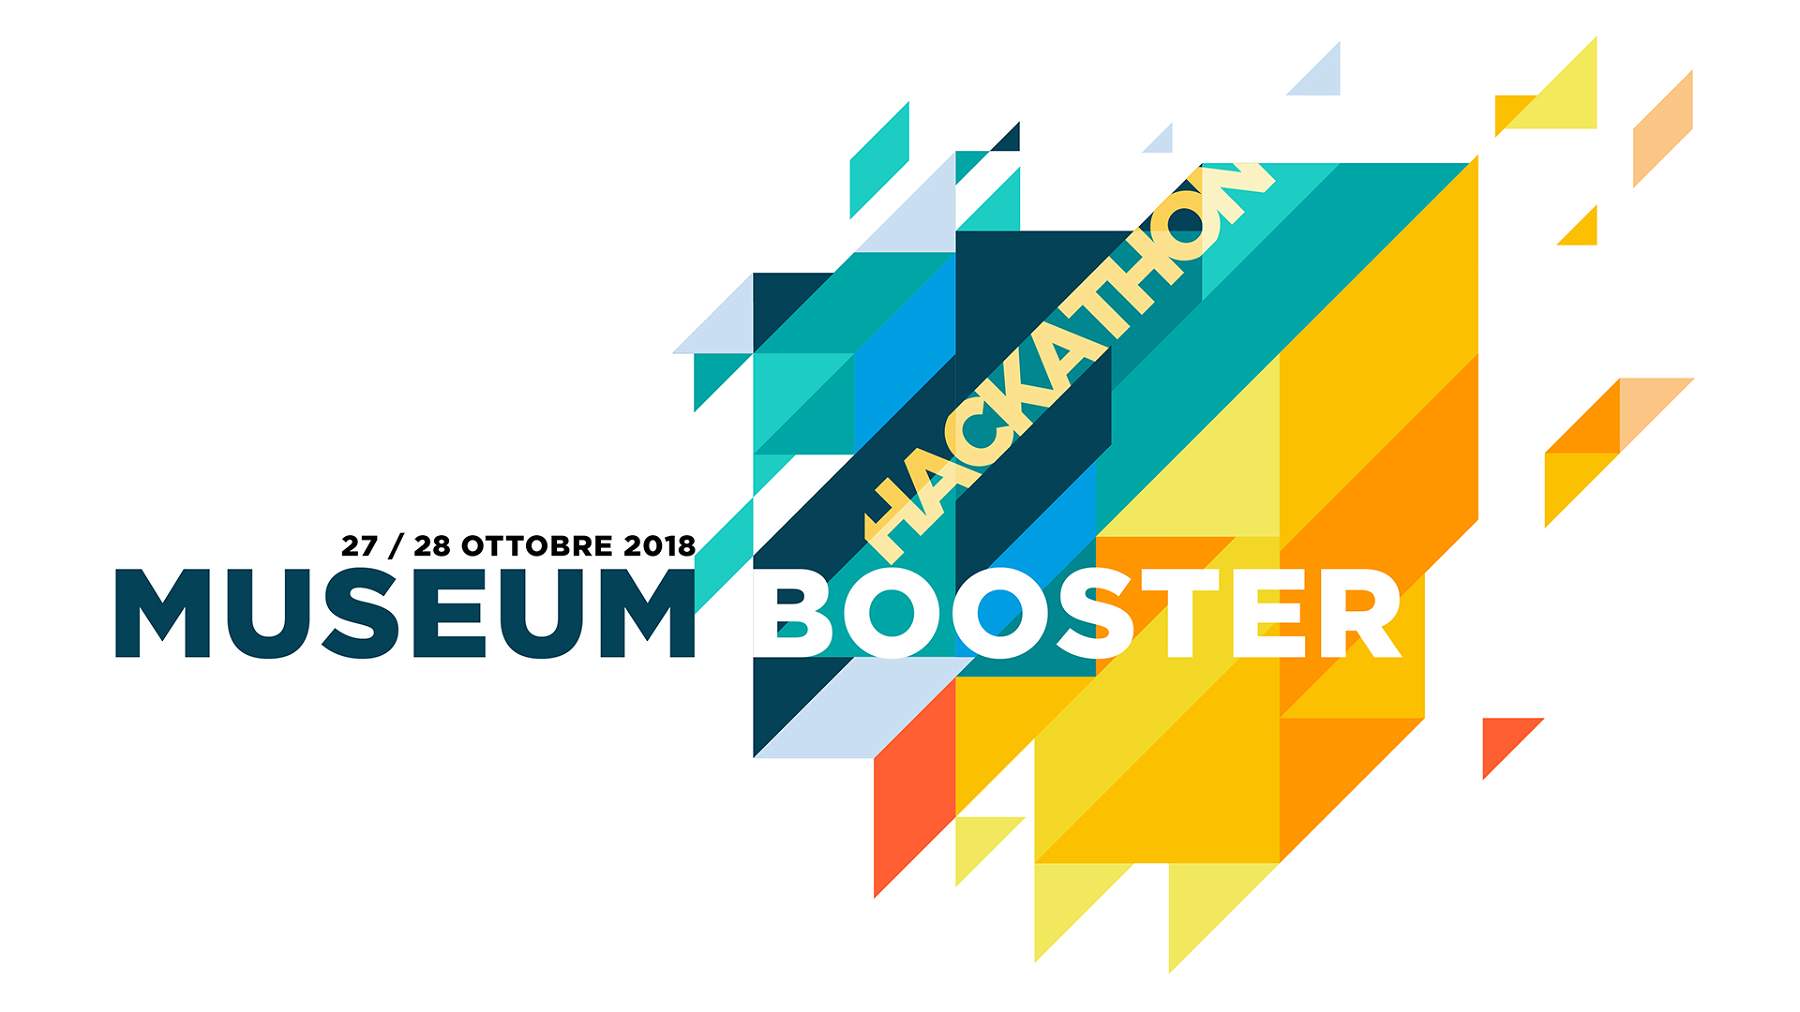 MAXXI in Rome kicks off second edition of Museum Booster, digital marathon for museums